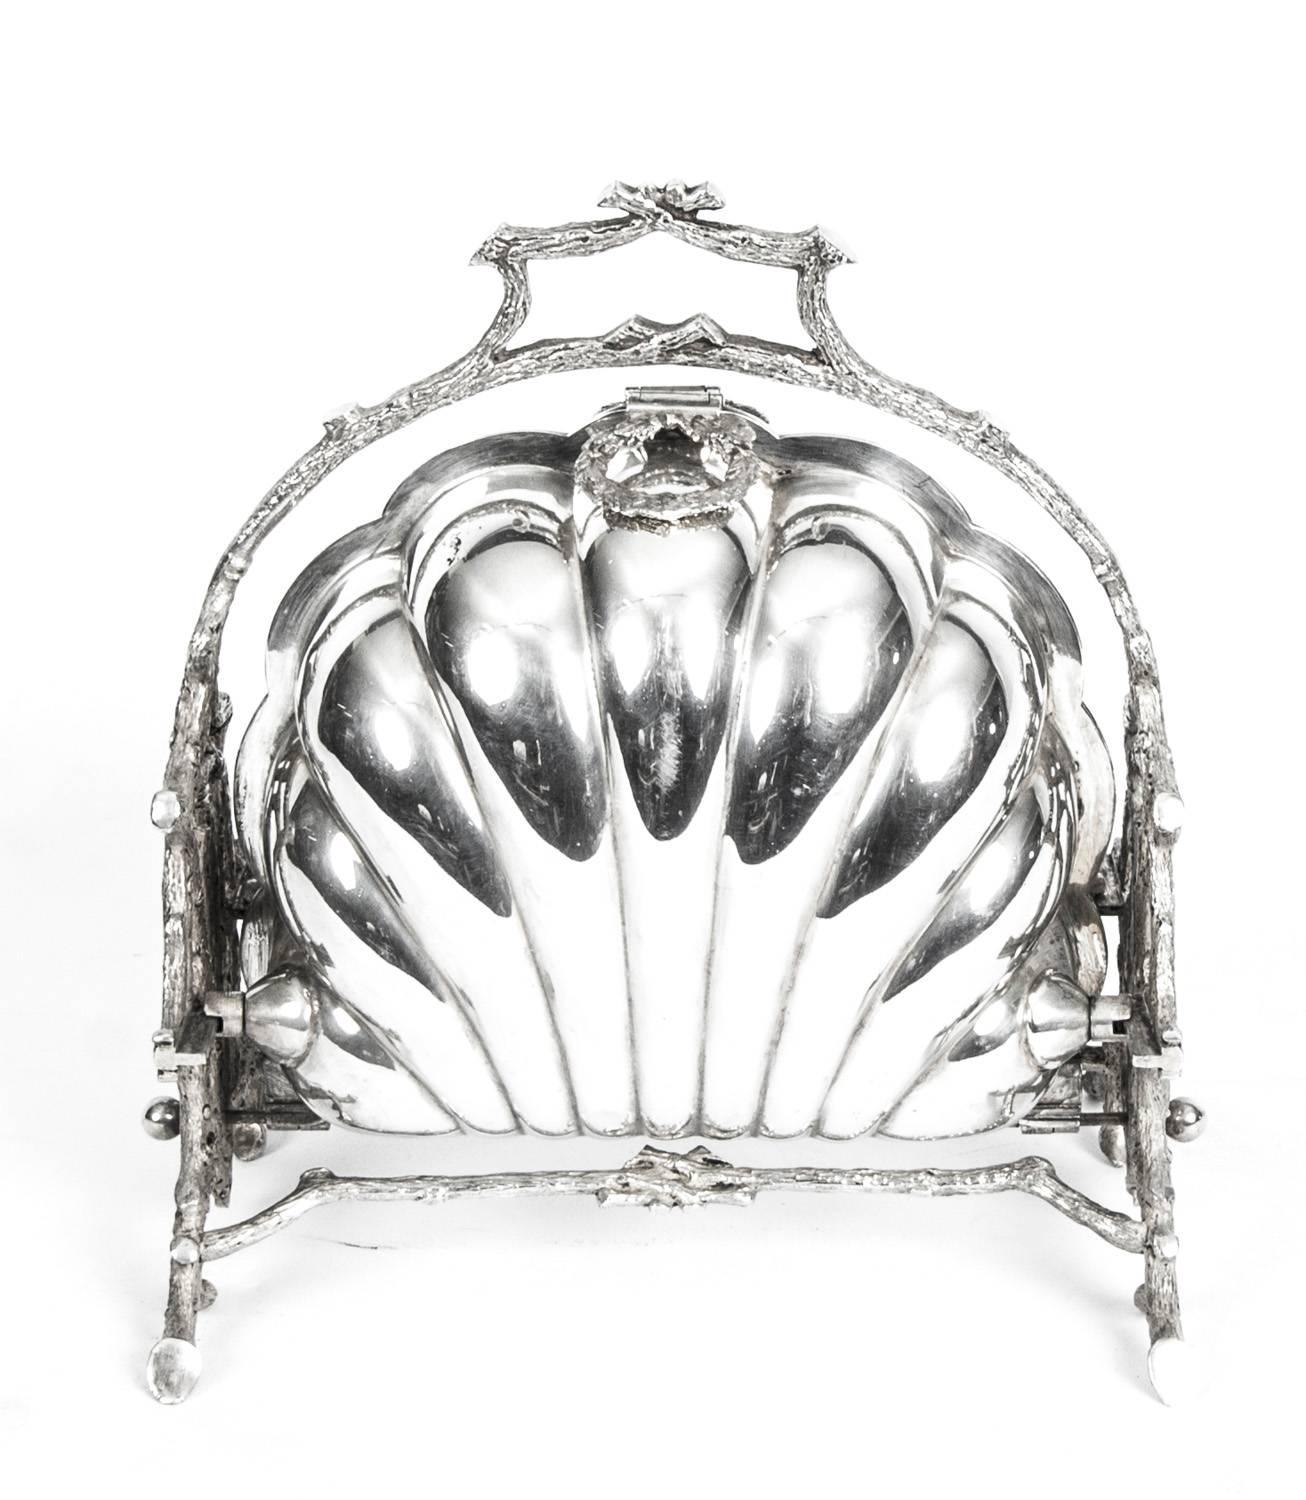 This is a beautiful Antique Victorian silver plated folding biscuit box, having a plain shell-style body sitting in a cast frame, and with original interior hand-pierced dividers circa 1880 in date.

The opening mechanism is as intricate as the